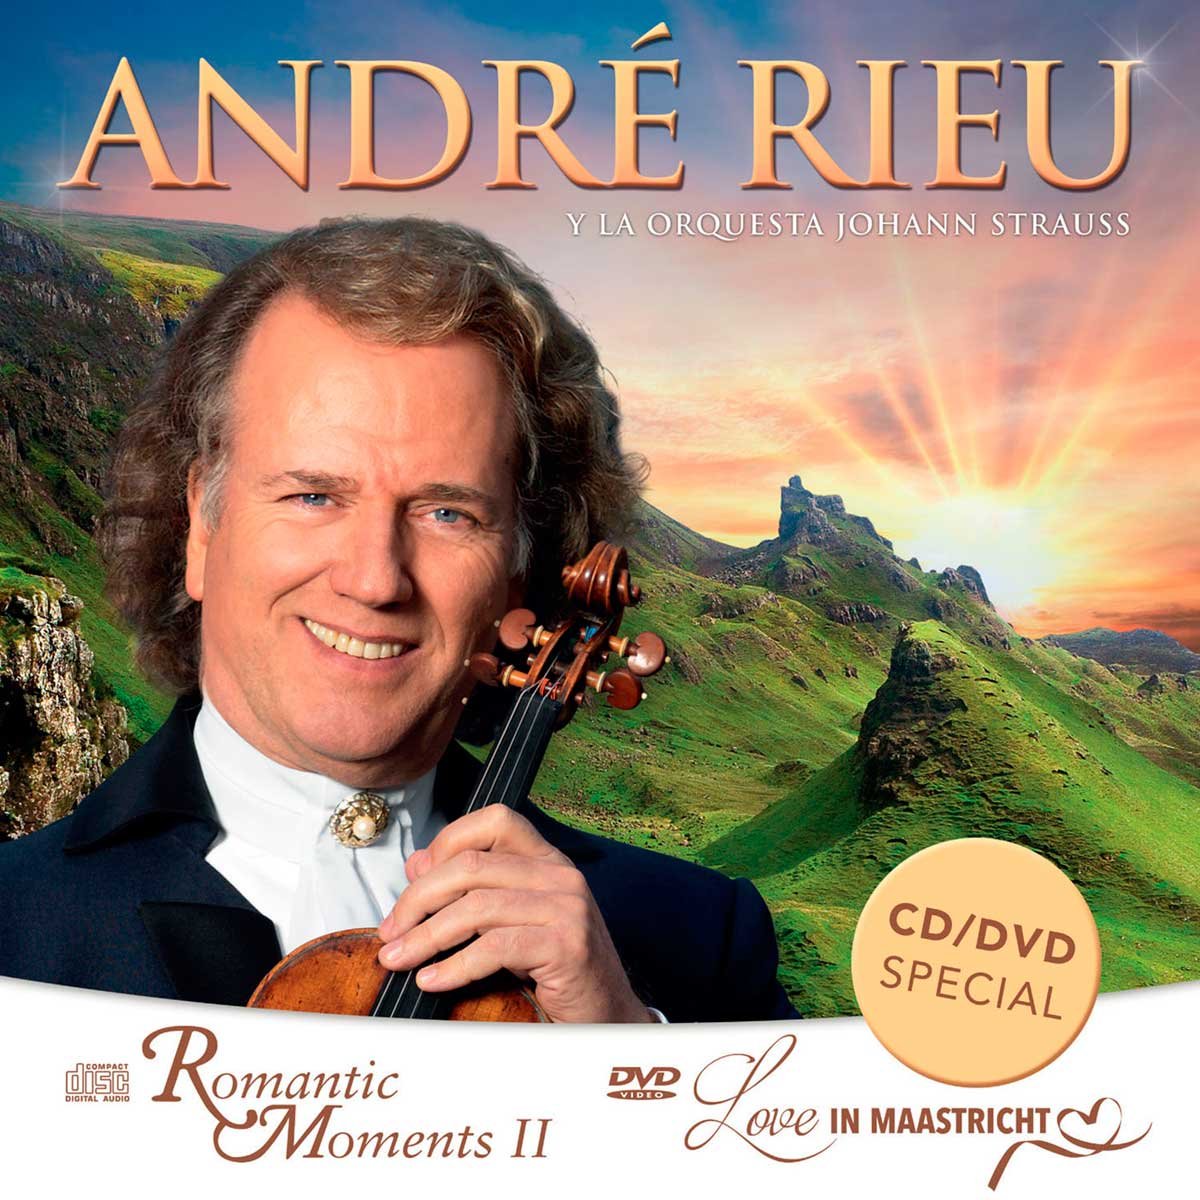 Cd + Dvd Andr&eacute; Rieu Romantic Moments II / Love In Maastricht